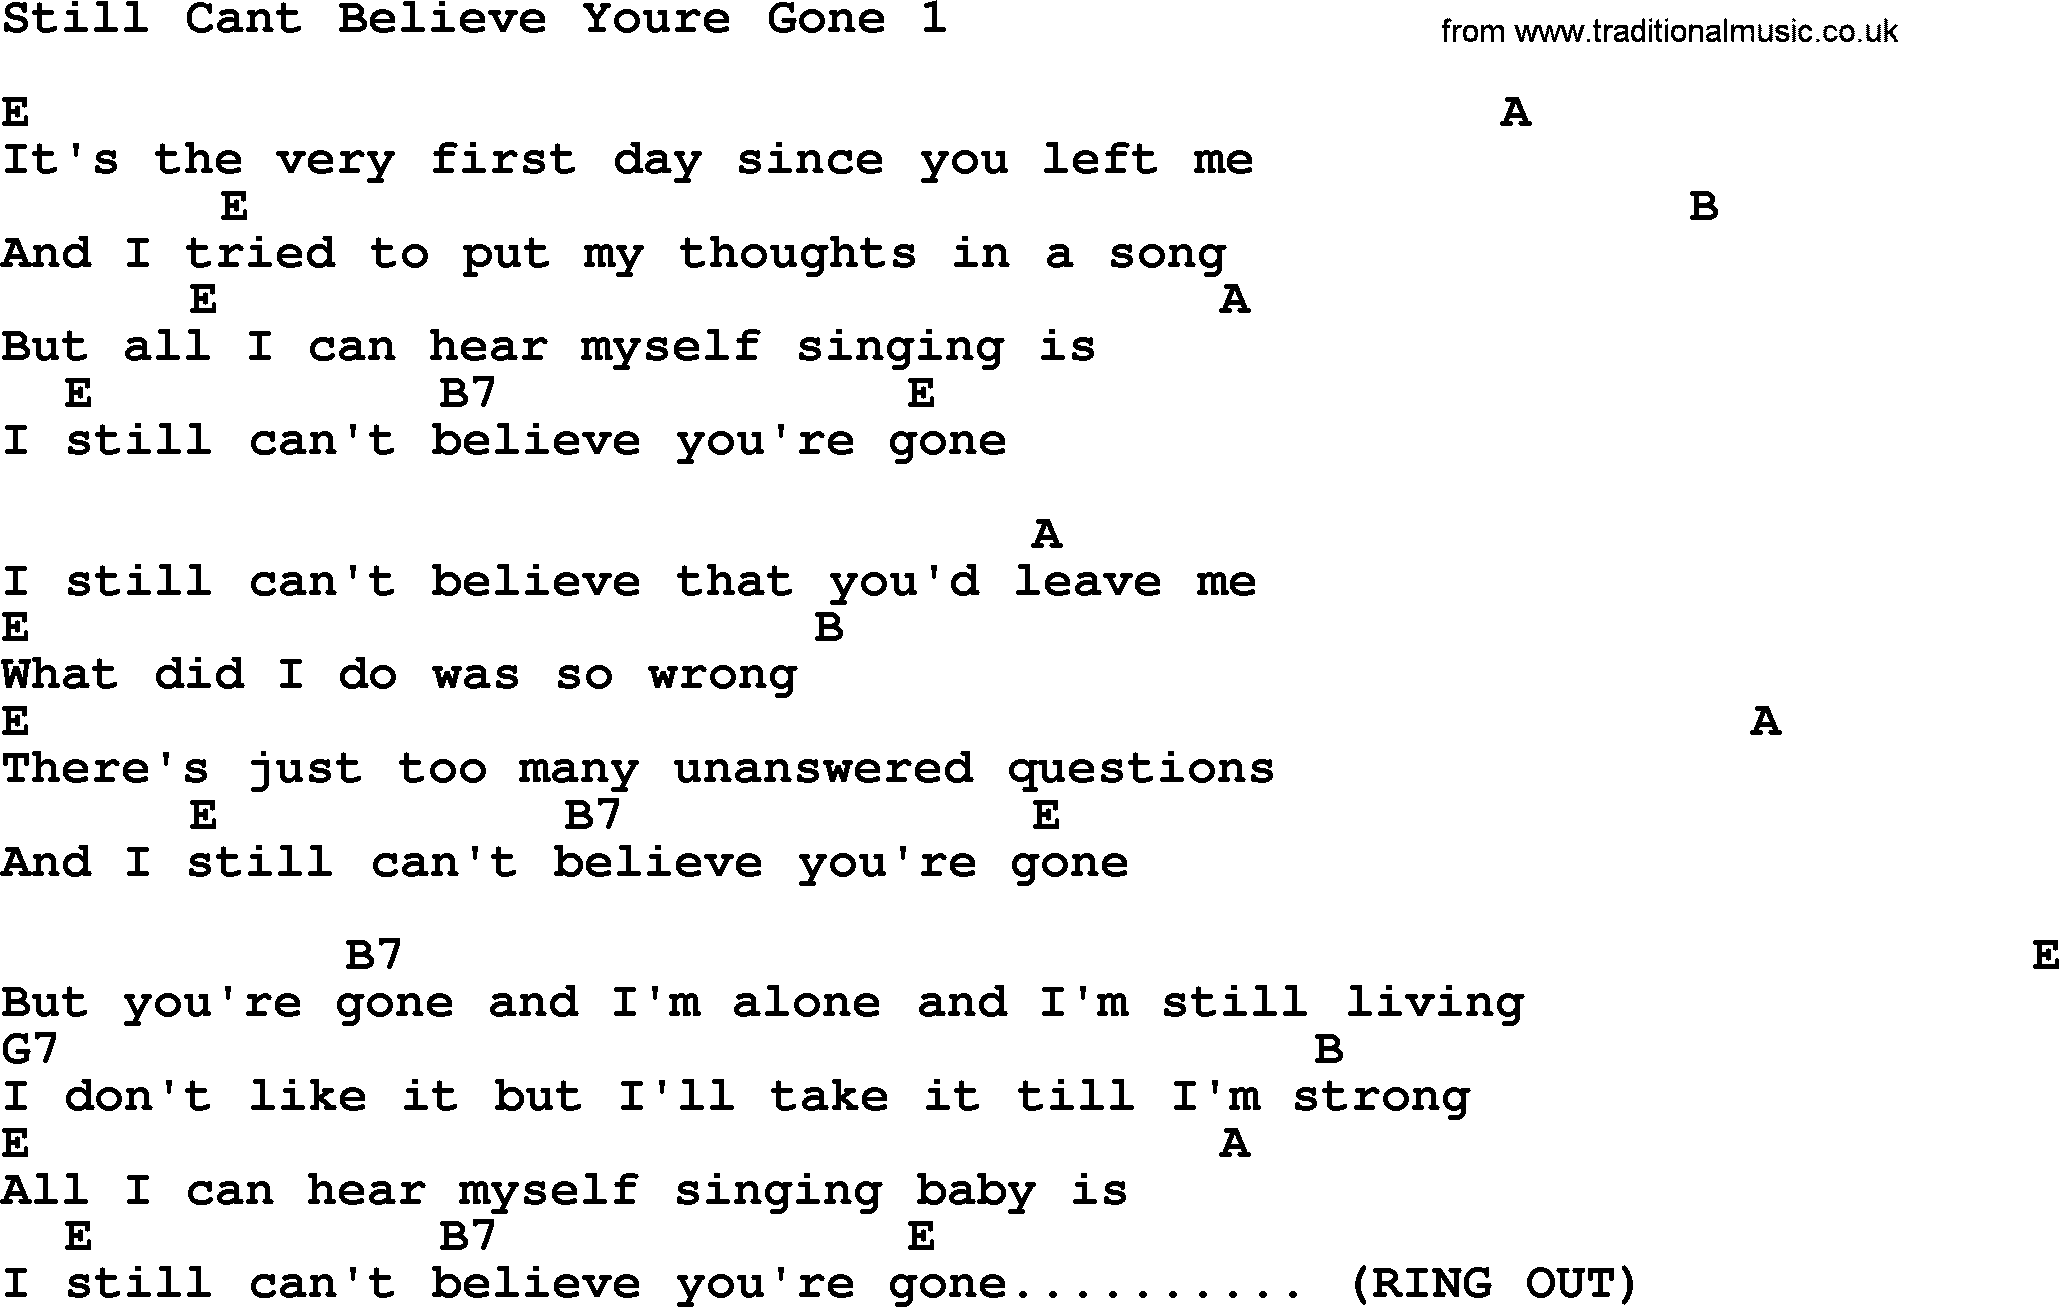 Willie Nelson song: Still Cant Believe Youre Gone 1, lyrics and chords